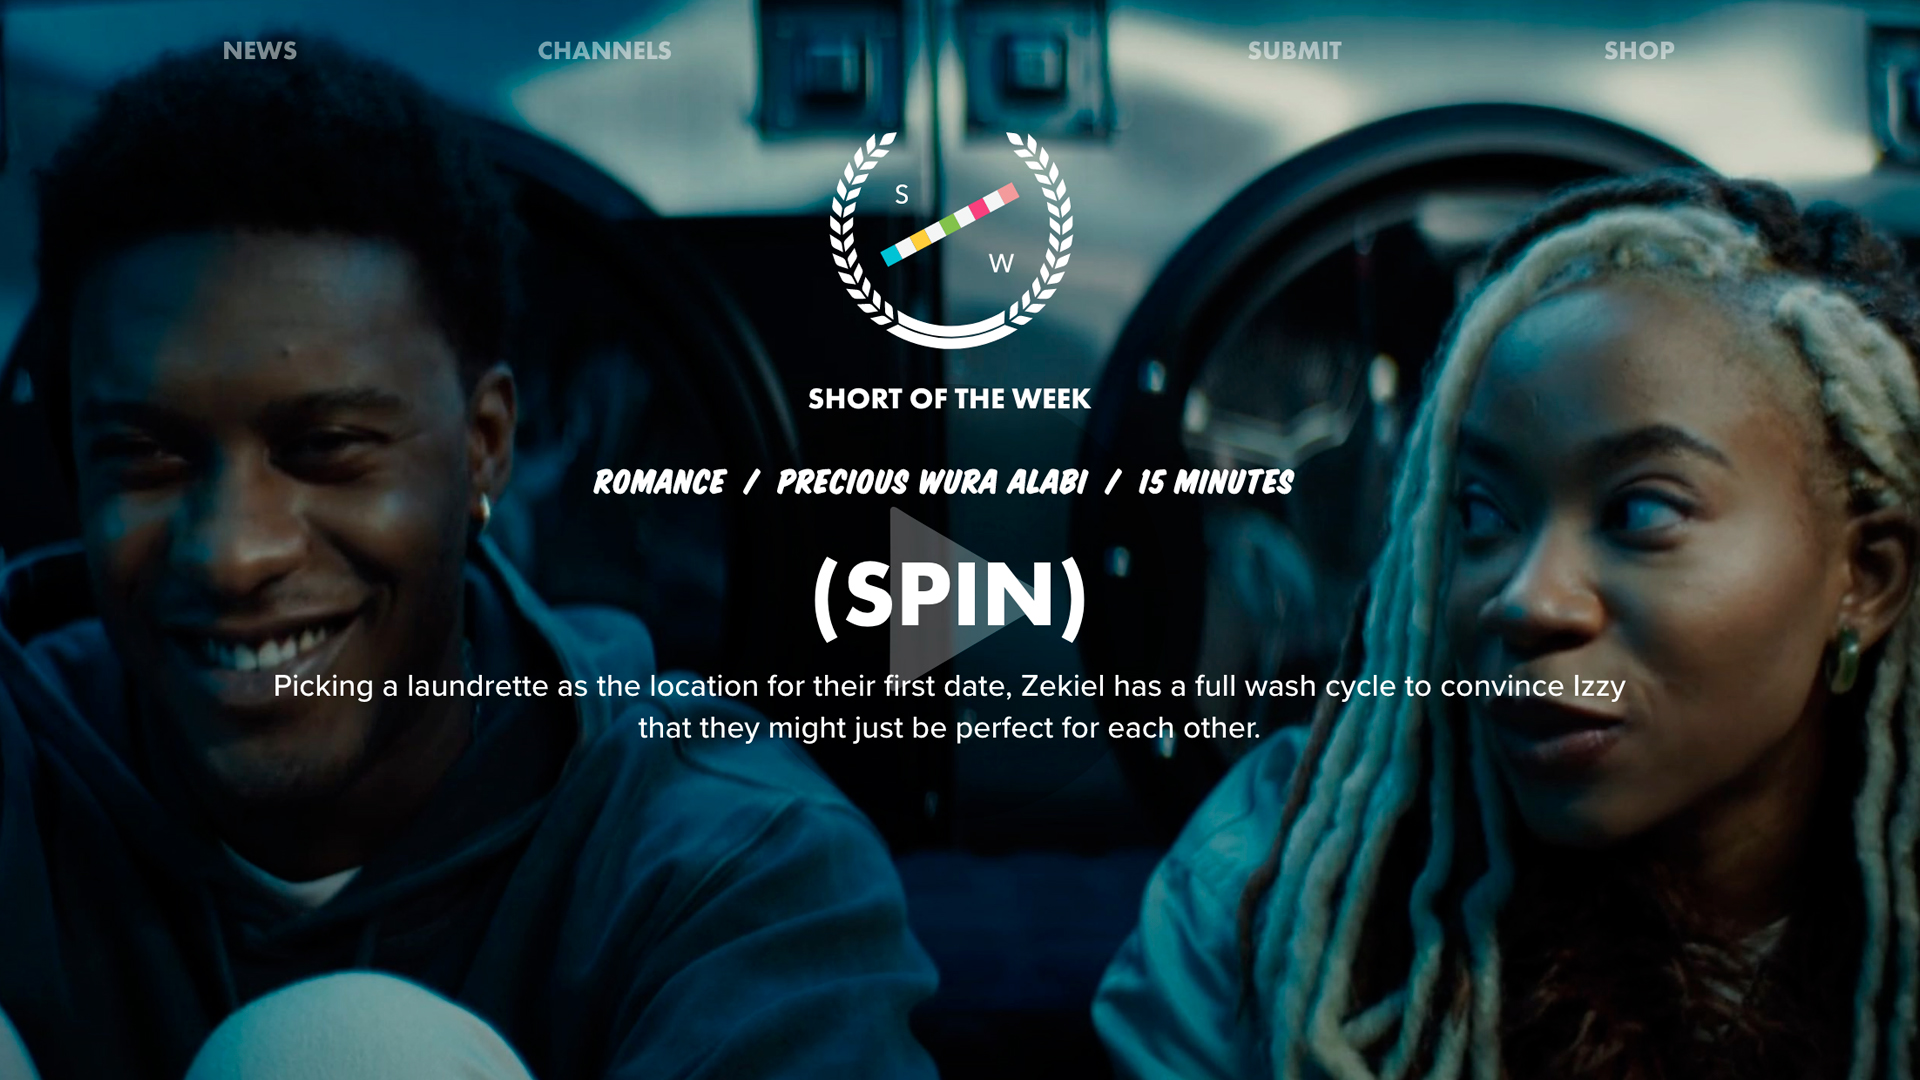 how to make your indie film seen - self-distribution, example of a platform - Short of The Week